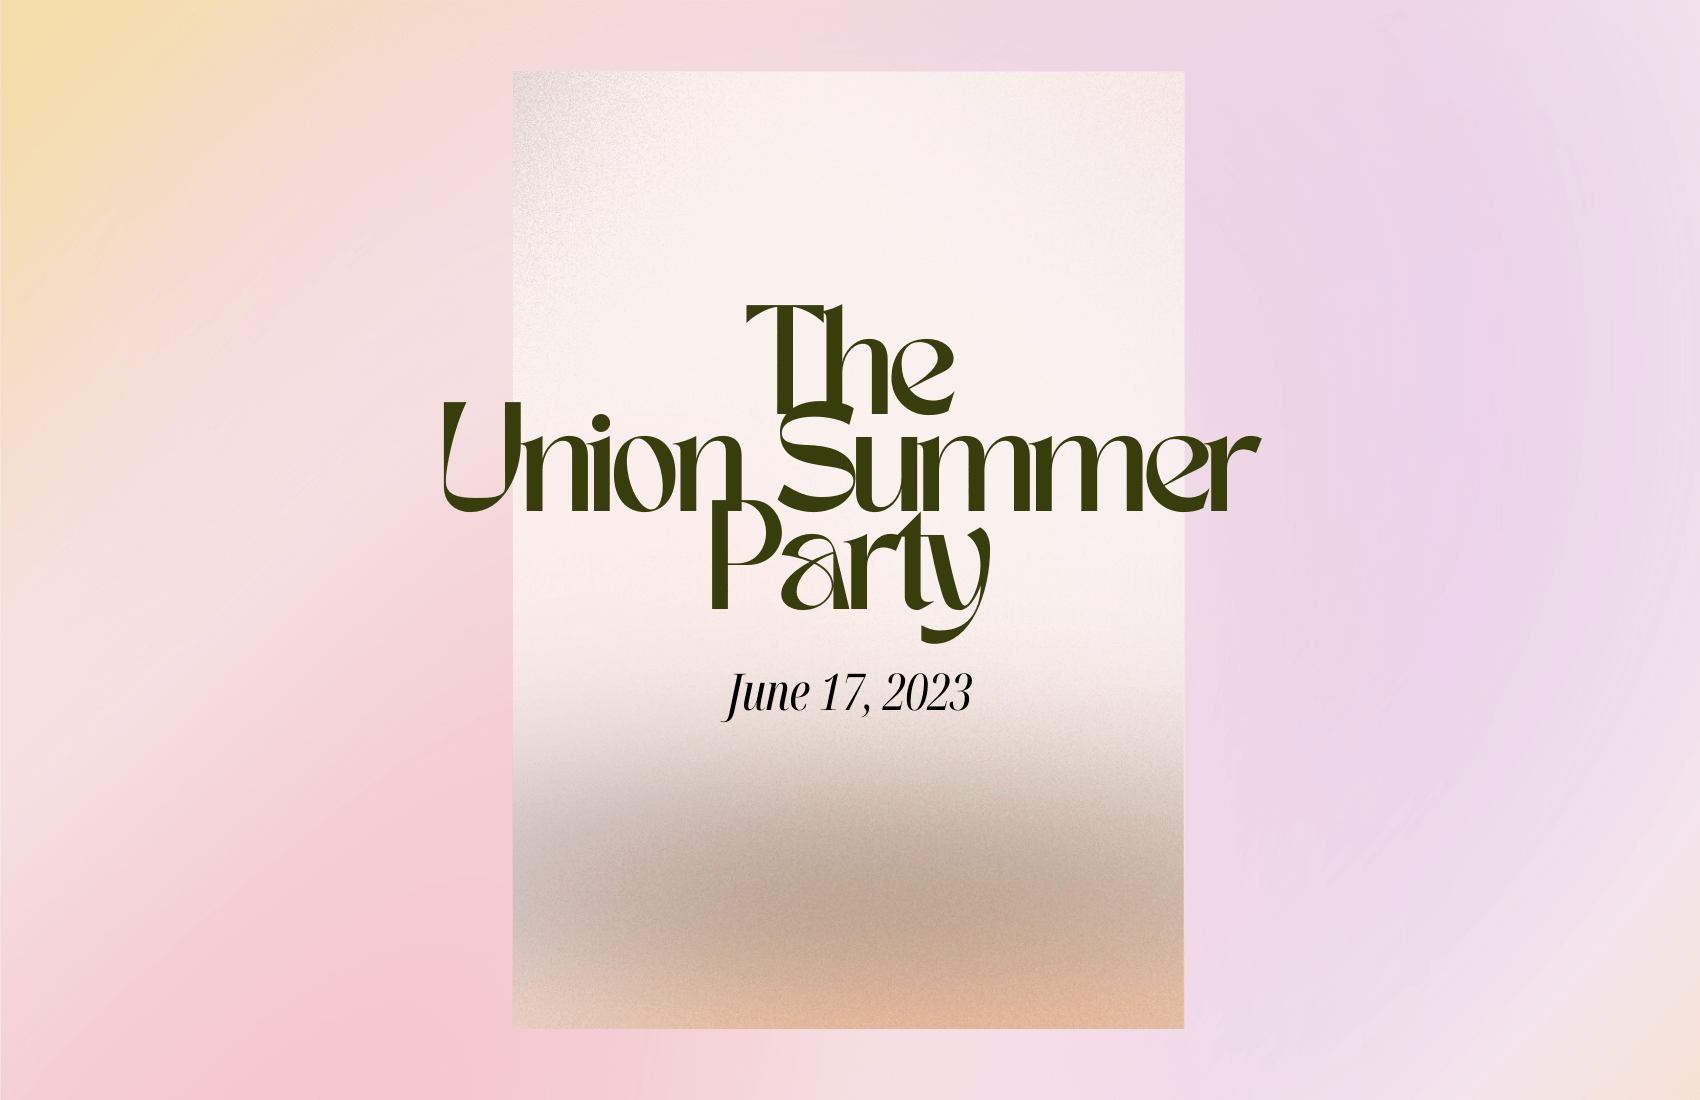 The Union Summer Party